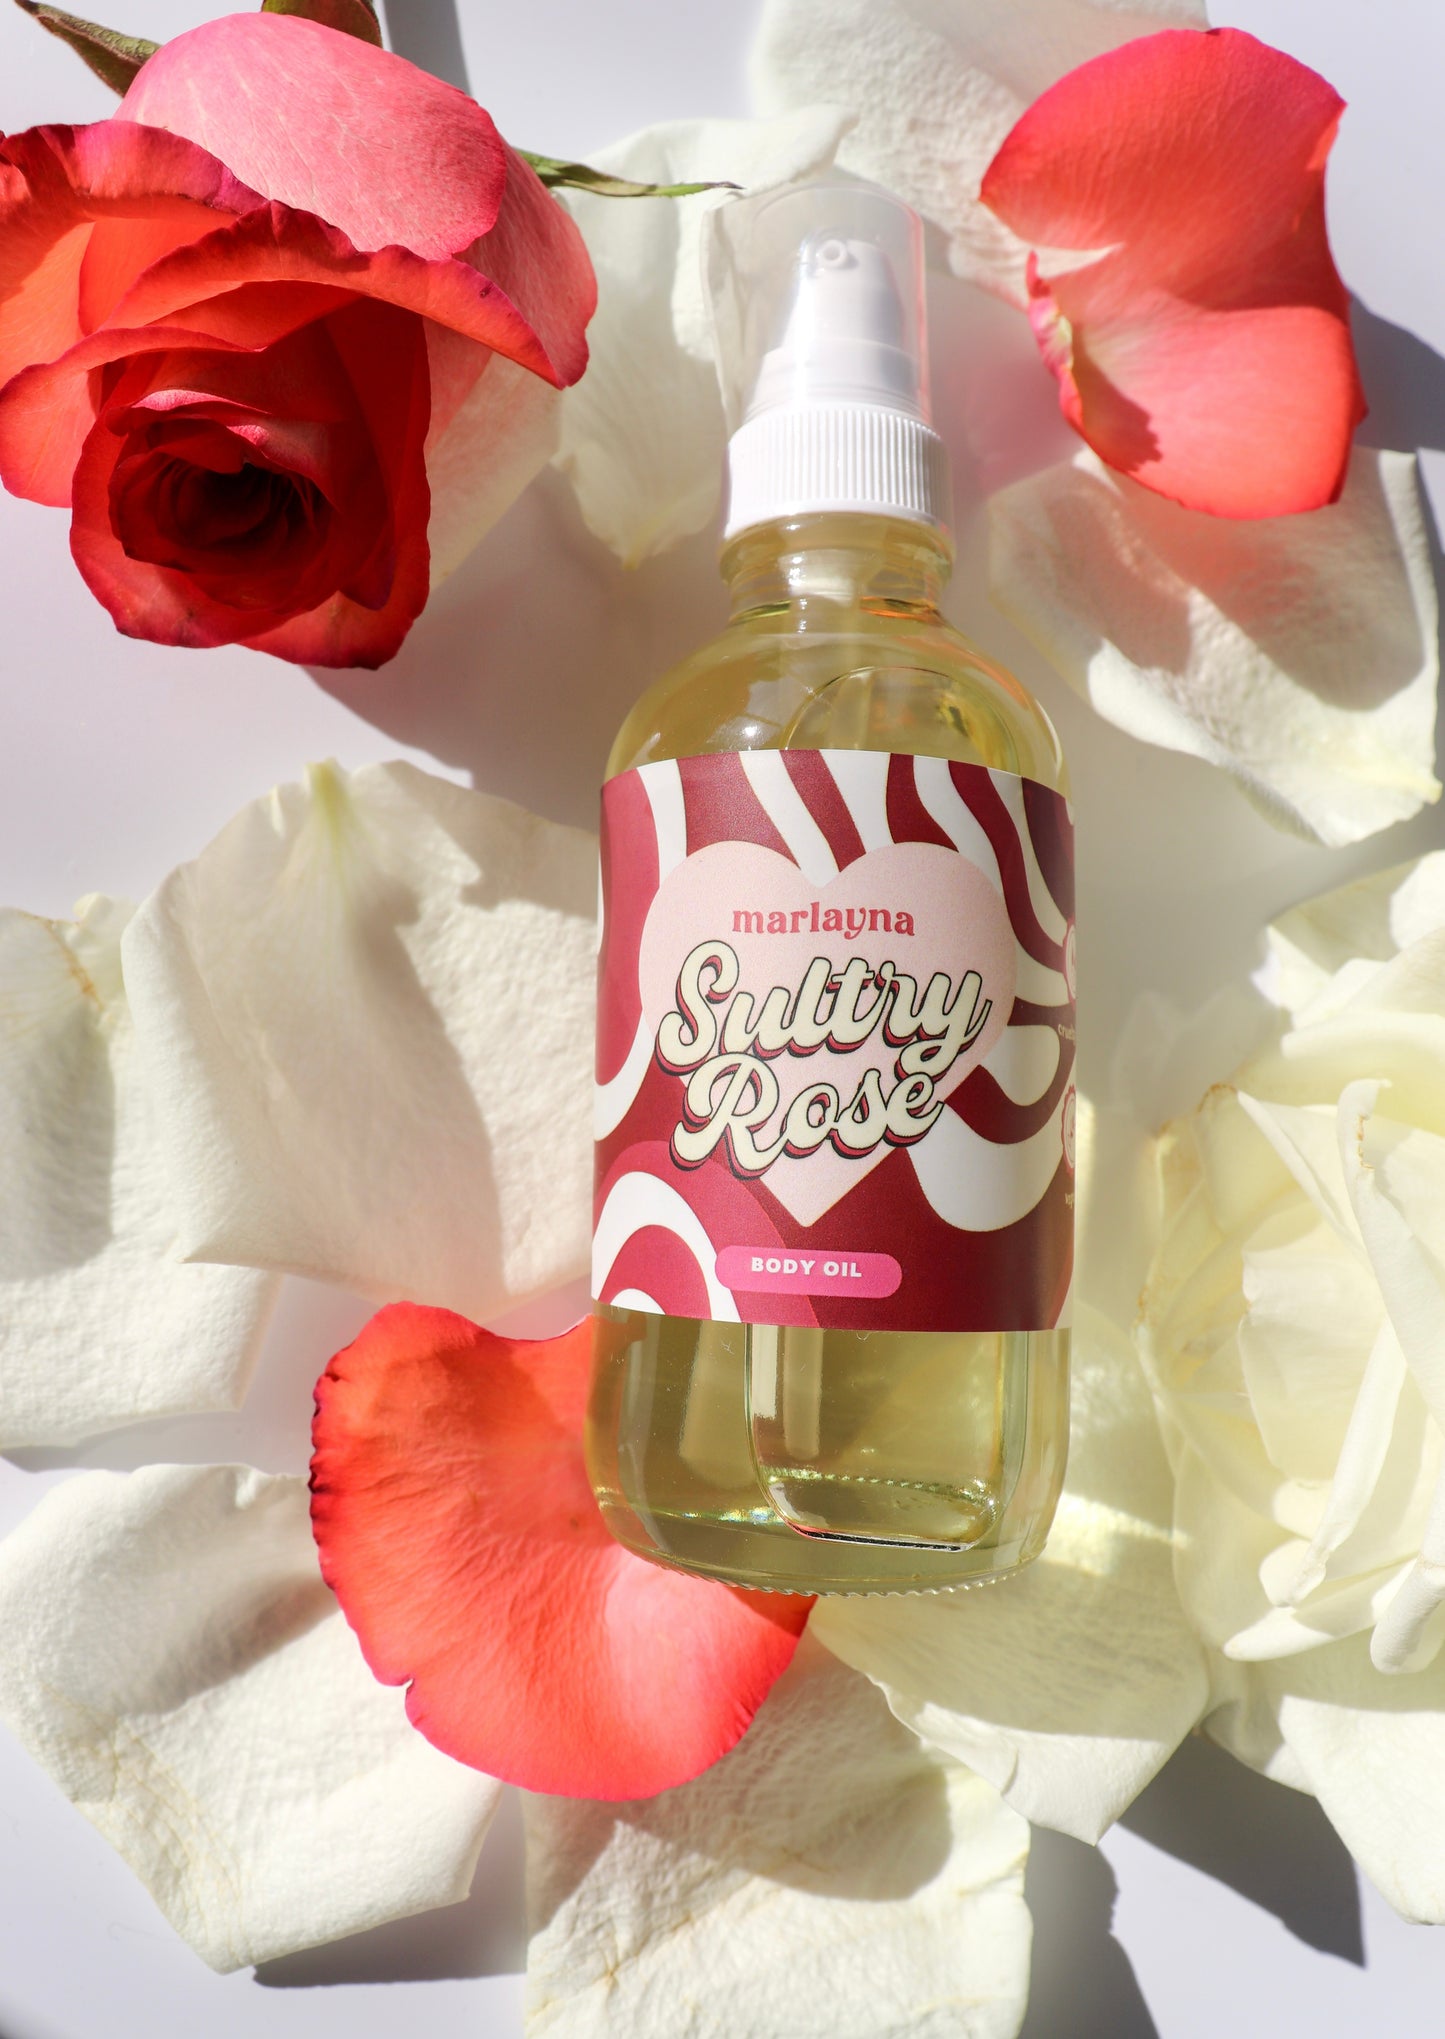 Sultry Rose Body Oil